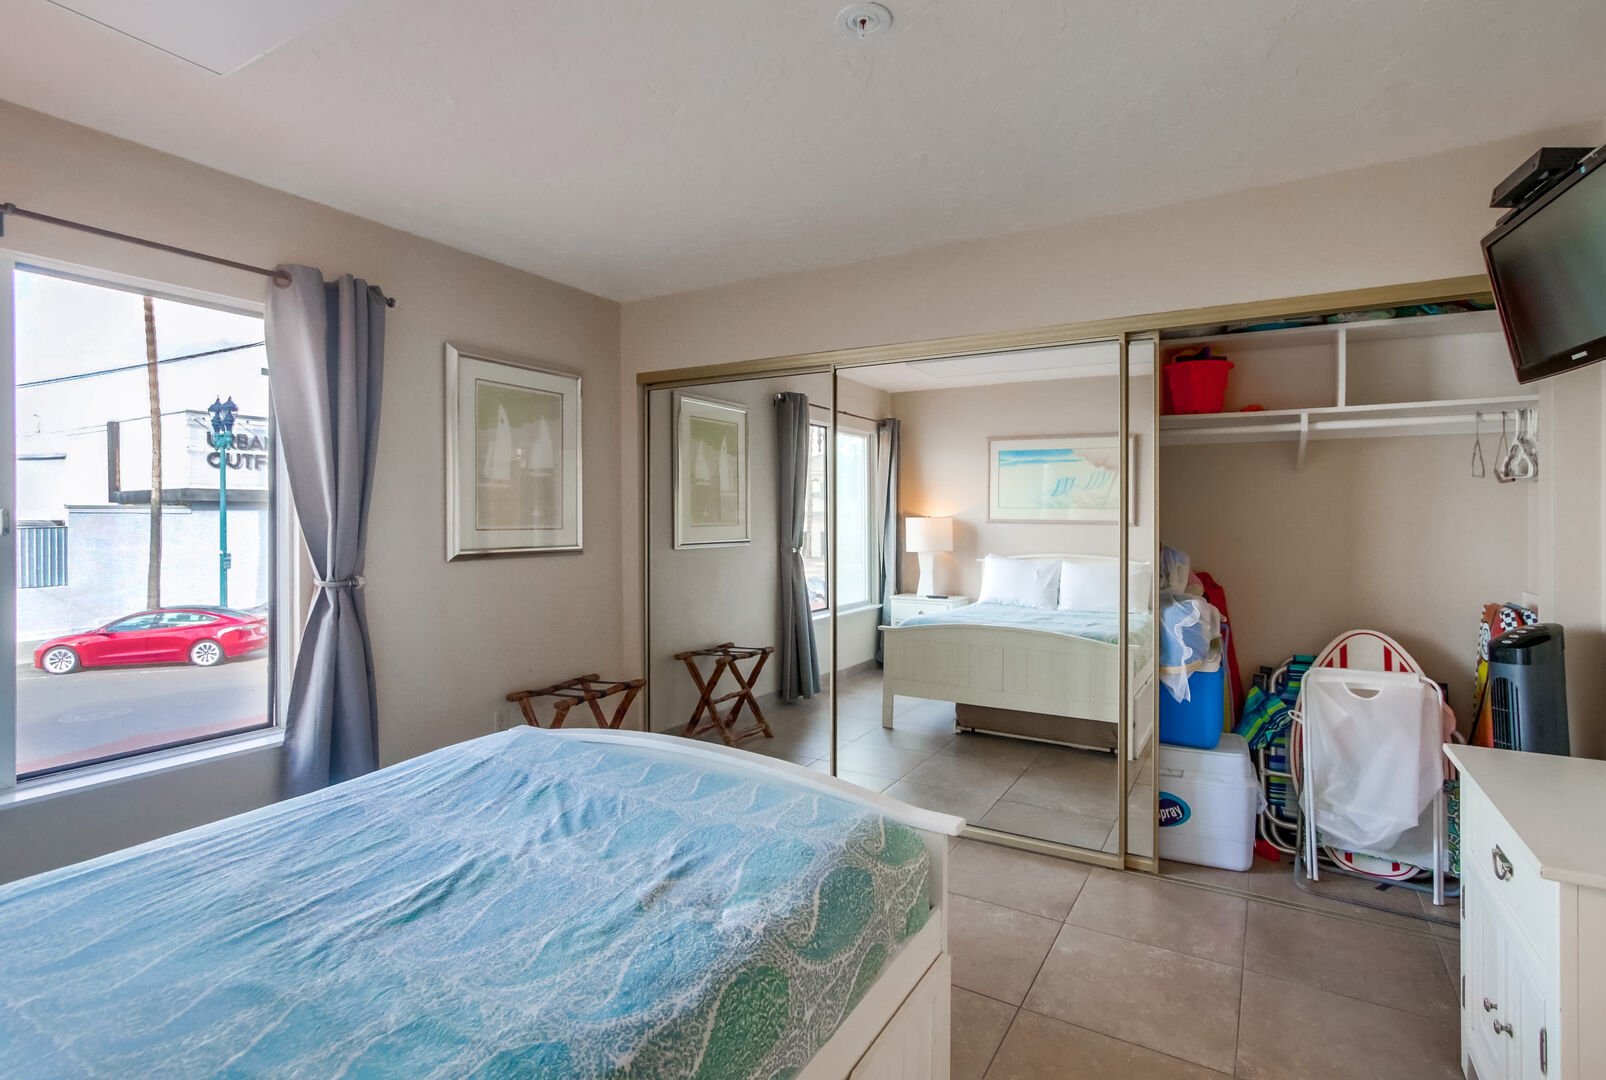 Guest bedroom with double size bed, trundle single bed, large closet, beach accessories, TV and corner views of the beach and boardwalk action!